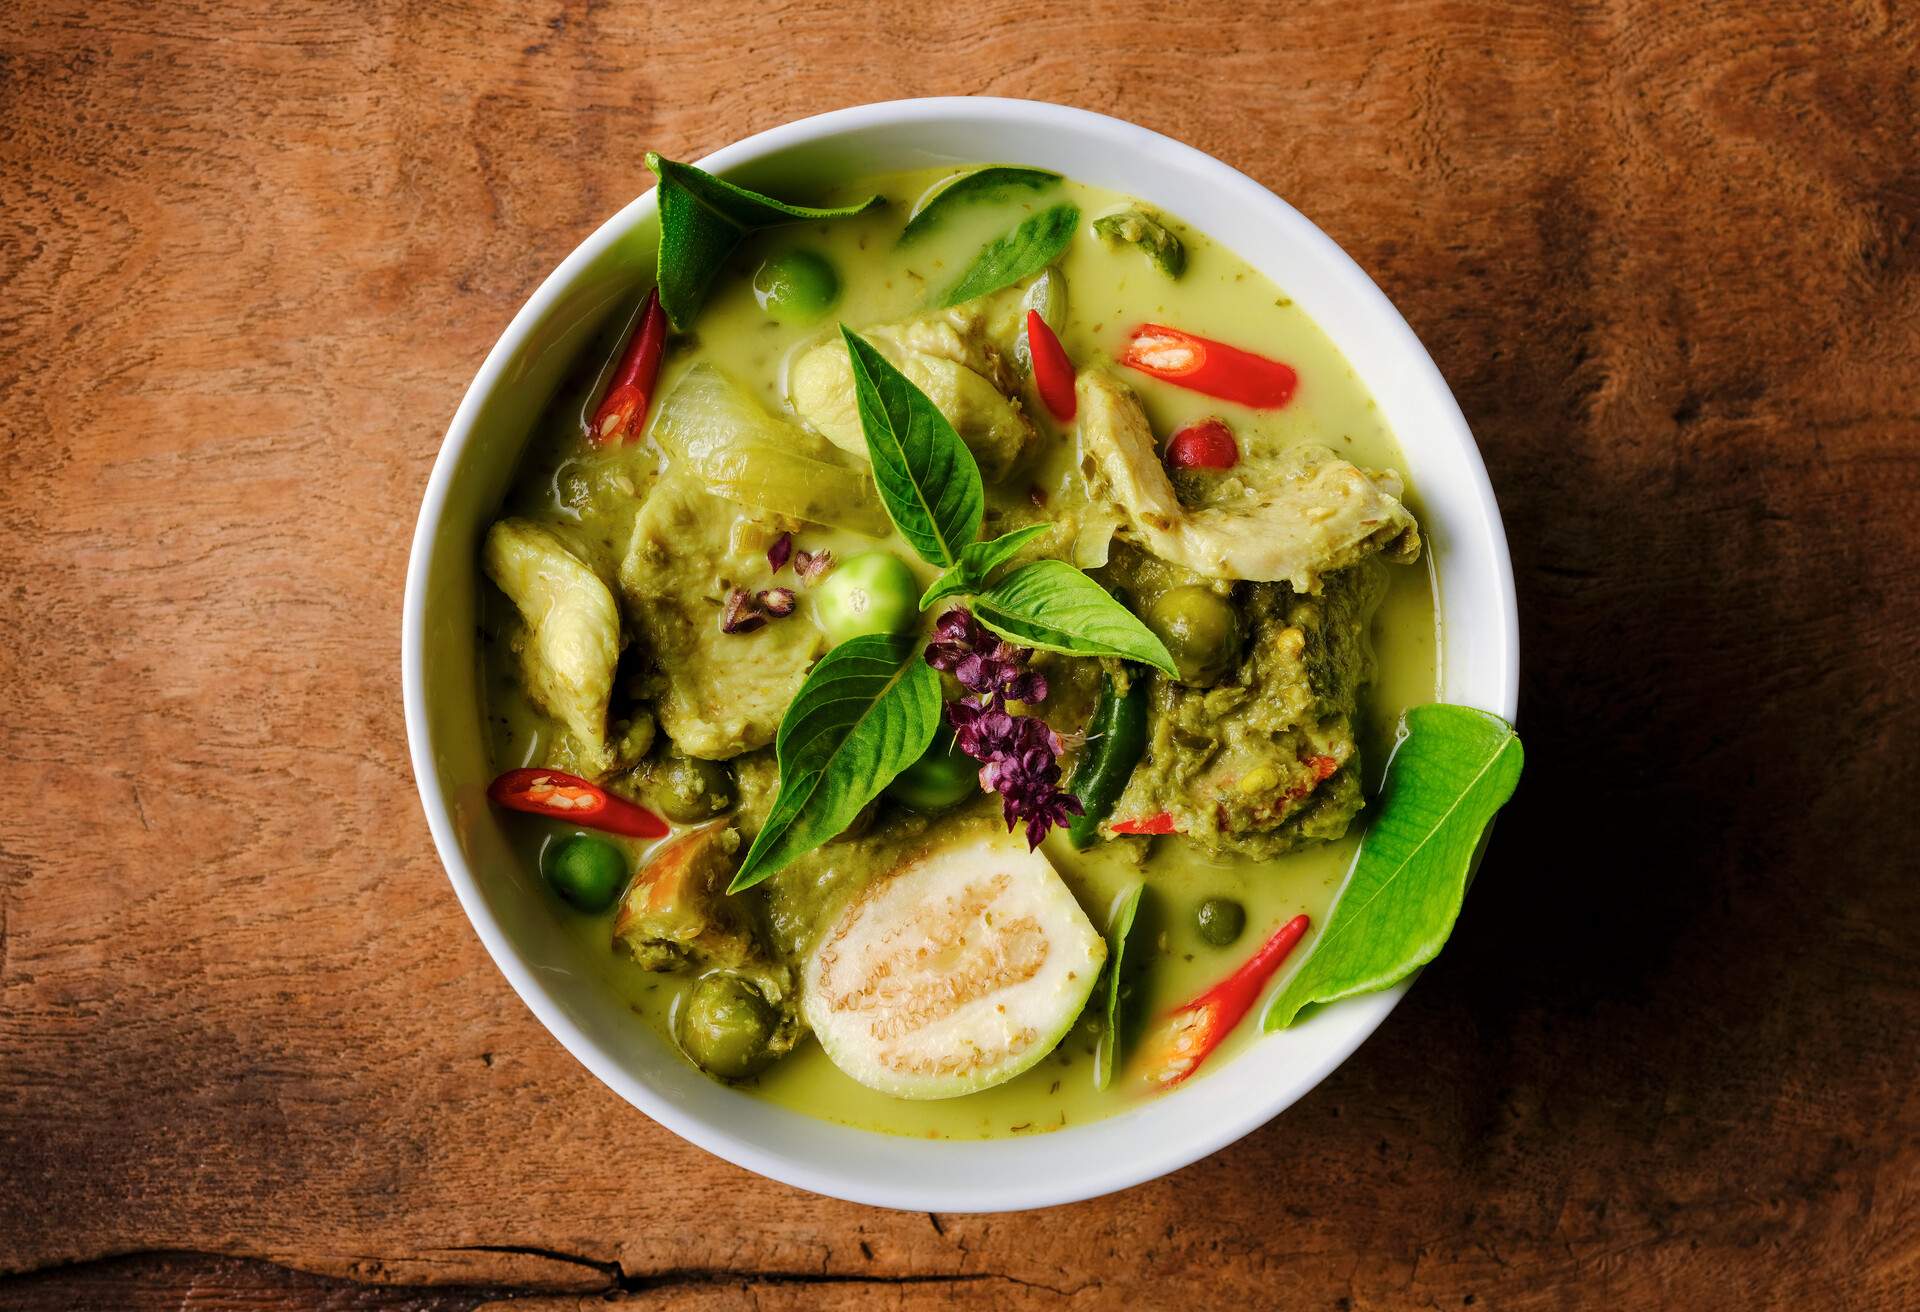 This Thai known in Thai as 'Gaeng Keow Wan Gai' dish is very famous and known all over the world and one of Thailand's popular signature dishes when it comes to Thai food. This dish consists of ingredients including a green herb-based base with fresh coconut milk, sweet basil, Thai aubergines, pea aubergines, chicken, and spicy fresh red chili. The combination of ingredients results in a sweet and spicy taste with a variety of complementary textures and is normally eaten together with fresh steamed Jasmine Thai rice or fresh rice noodles. The image was taken from directly above with the bowl set on an old worn textured wooden background with lots of grain and character.